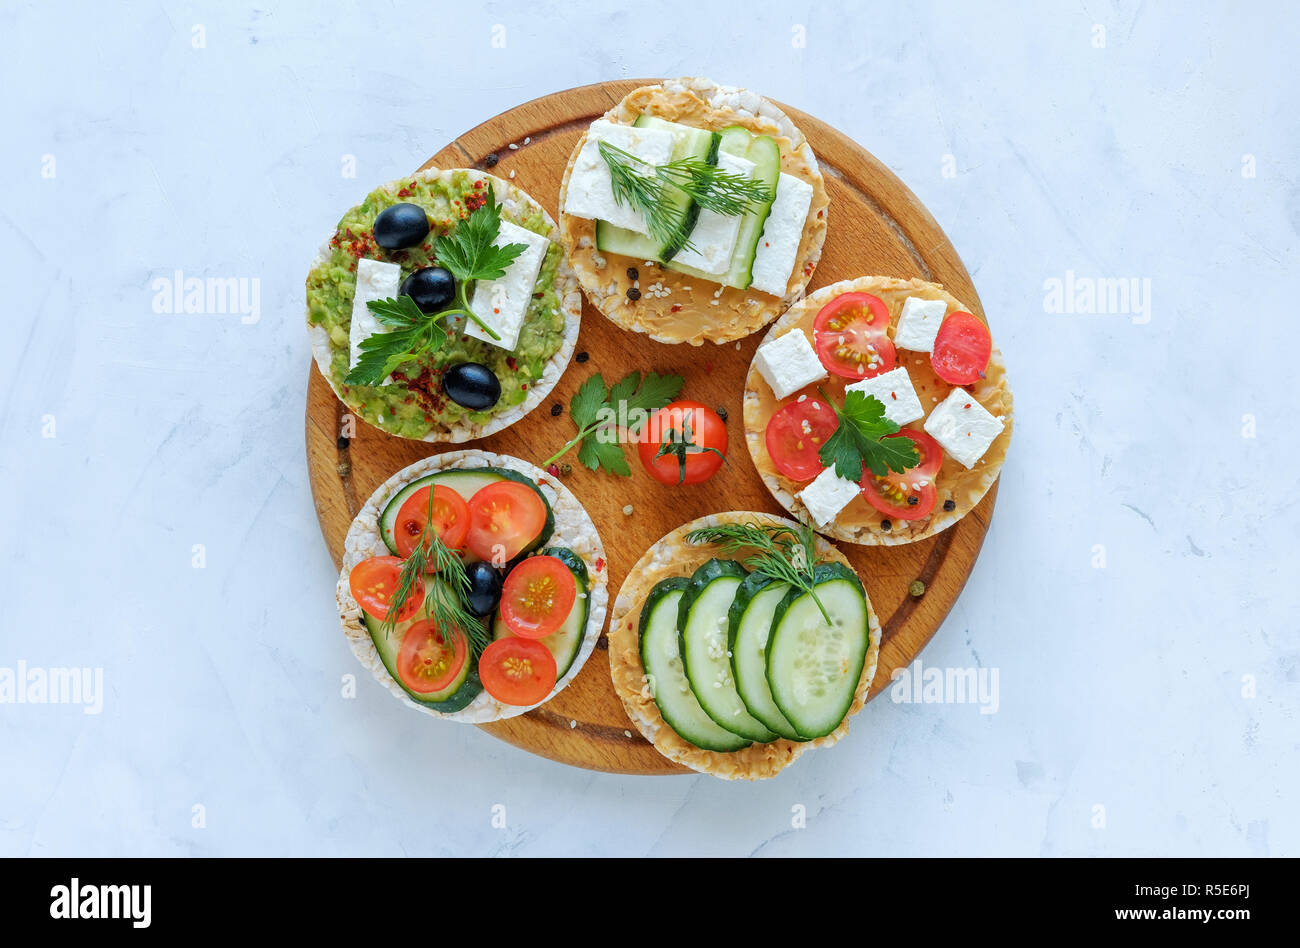 Homemade delicious appetizers on rice cakes with fresh veggies, feta cheese, herbs and boiled egg served on a wooden board over blue Stock Photo